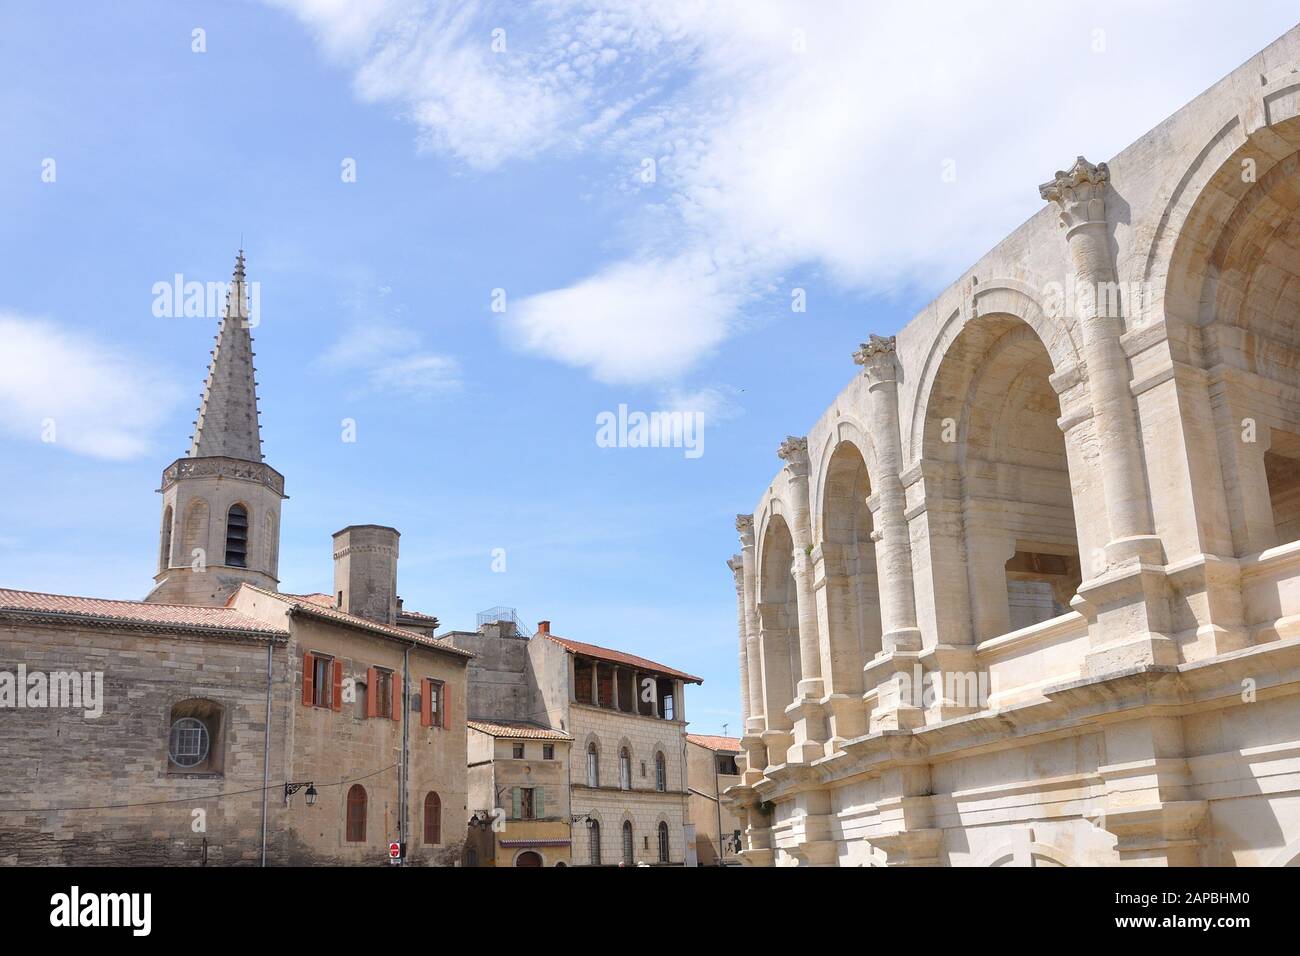 arene d'Arles, city in the south of France. bell tower and arena nearby Stock Photo